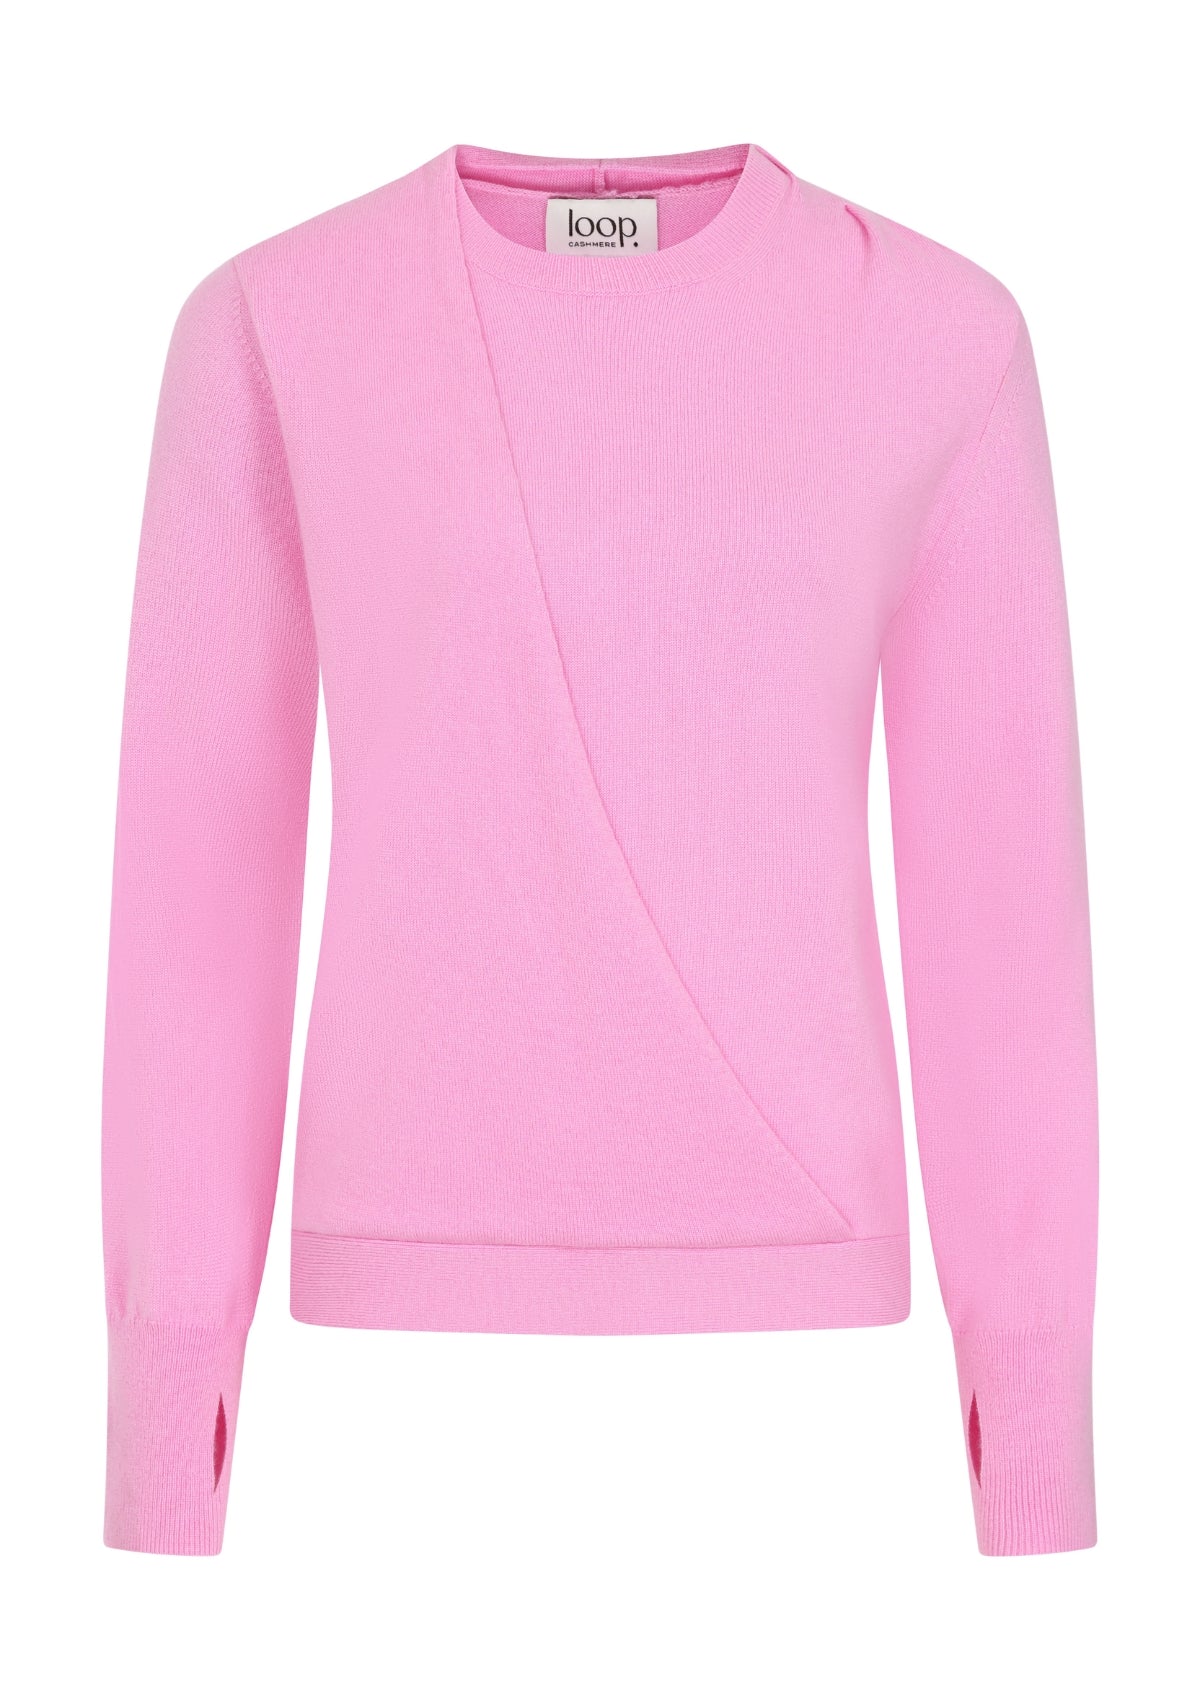 Ruched Cashmere Sweatshirt in Peony Pink